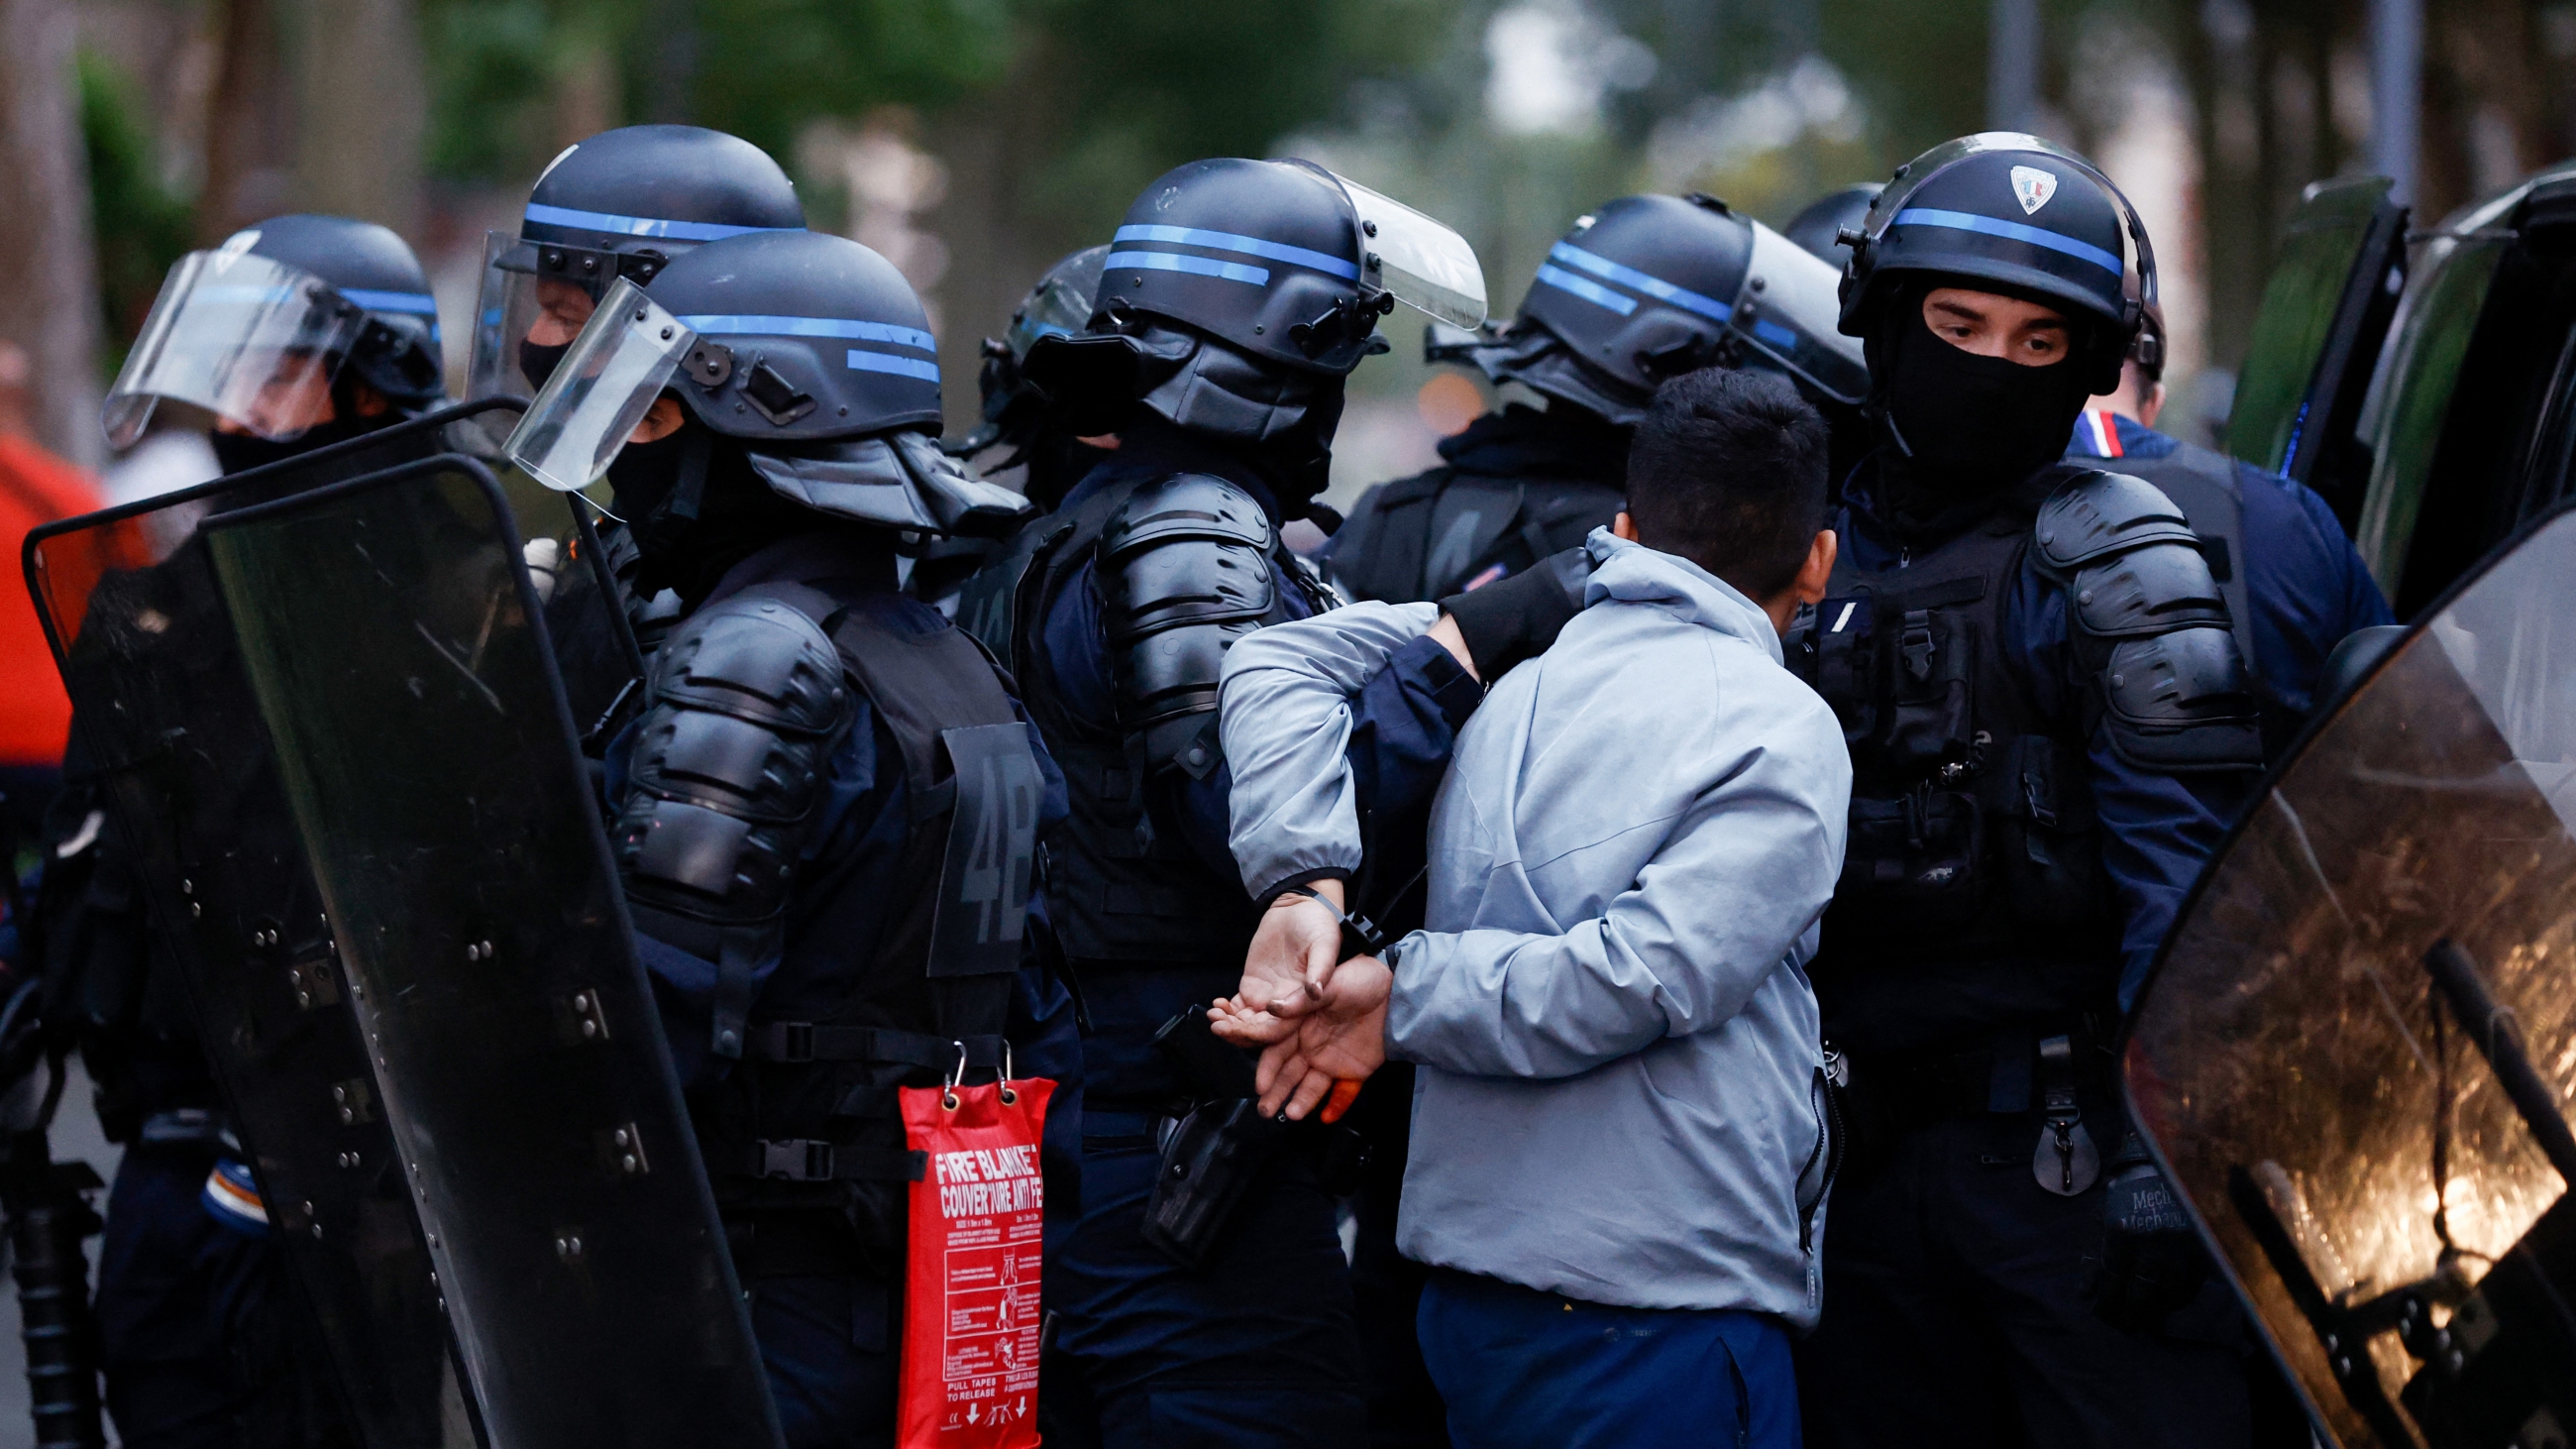 Police officers arrest a man during protests in Lille, northern France, two days after a teenager was shot dead by a police officer in the Paris suburb of Nanterre (AFP)